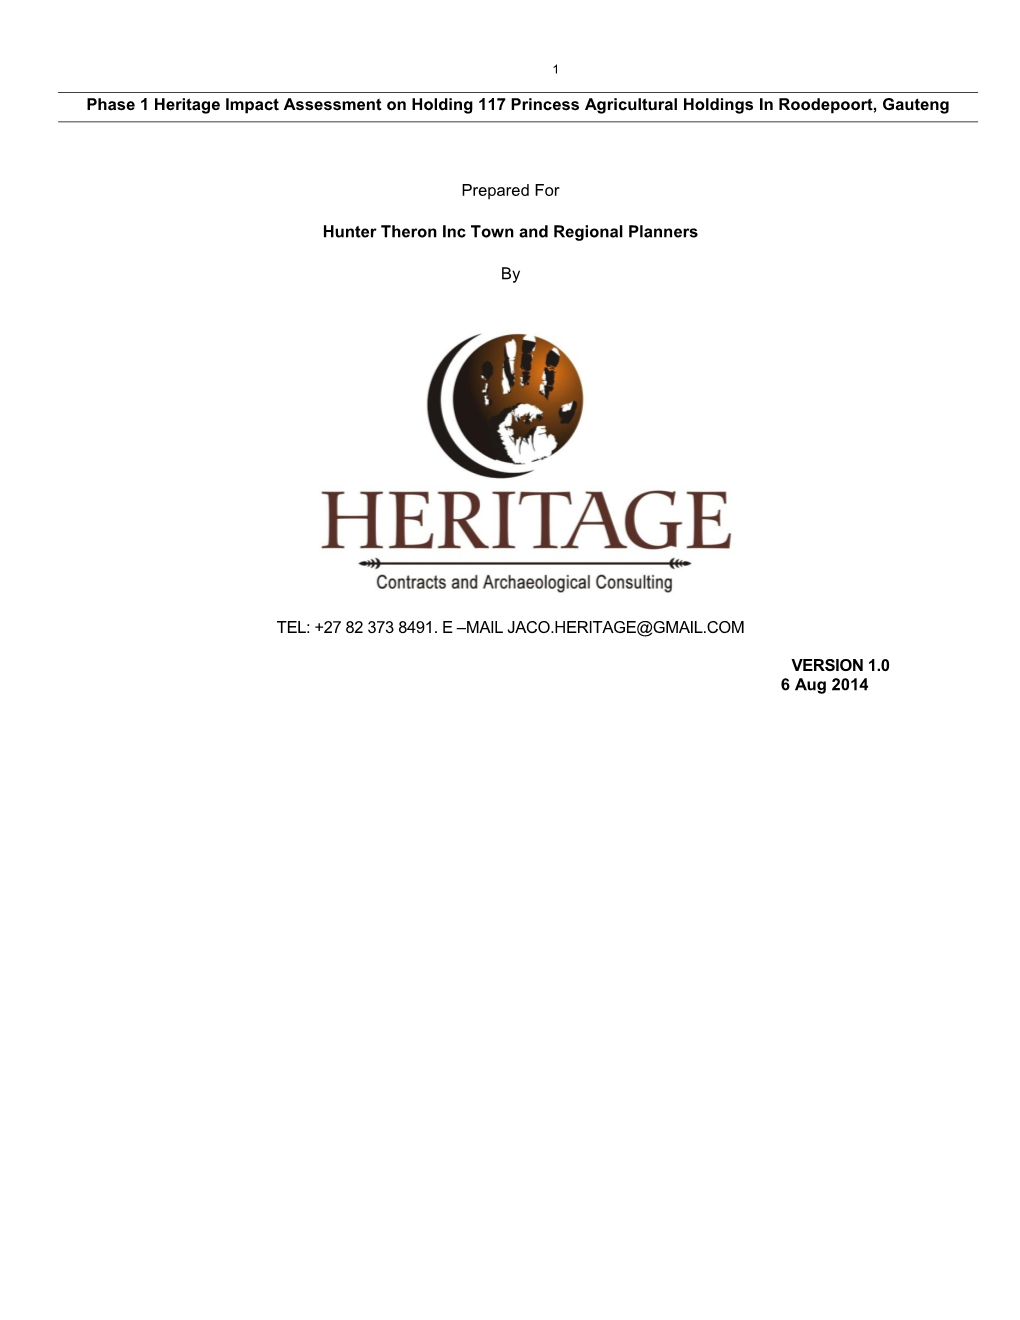 Phase 1 Heritage Impact Assessment on Holding 117 Princess Agricultural Holdings in Roodepoort, Gauteng Prepared for Hunter Ther